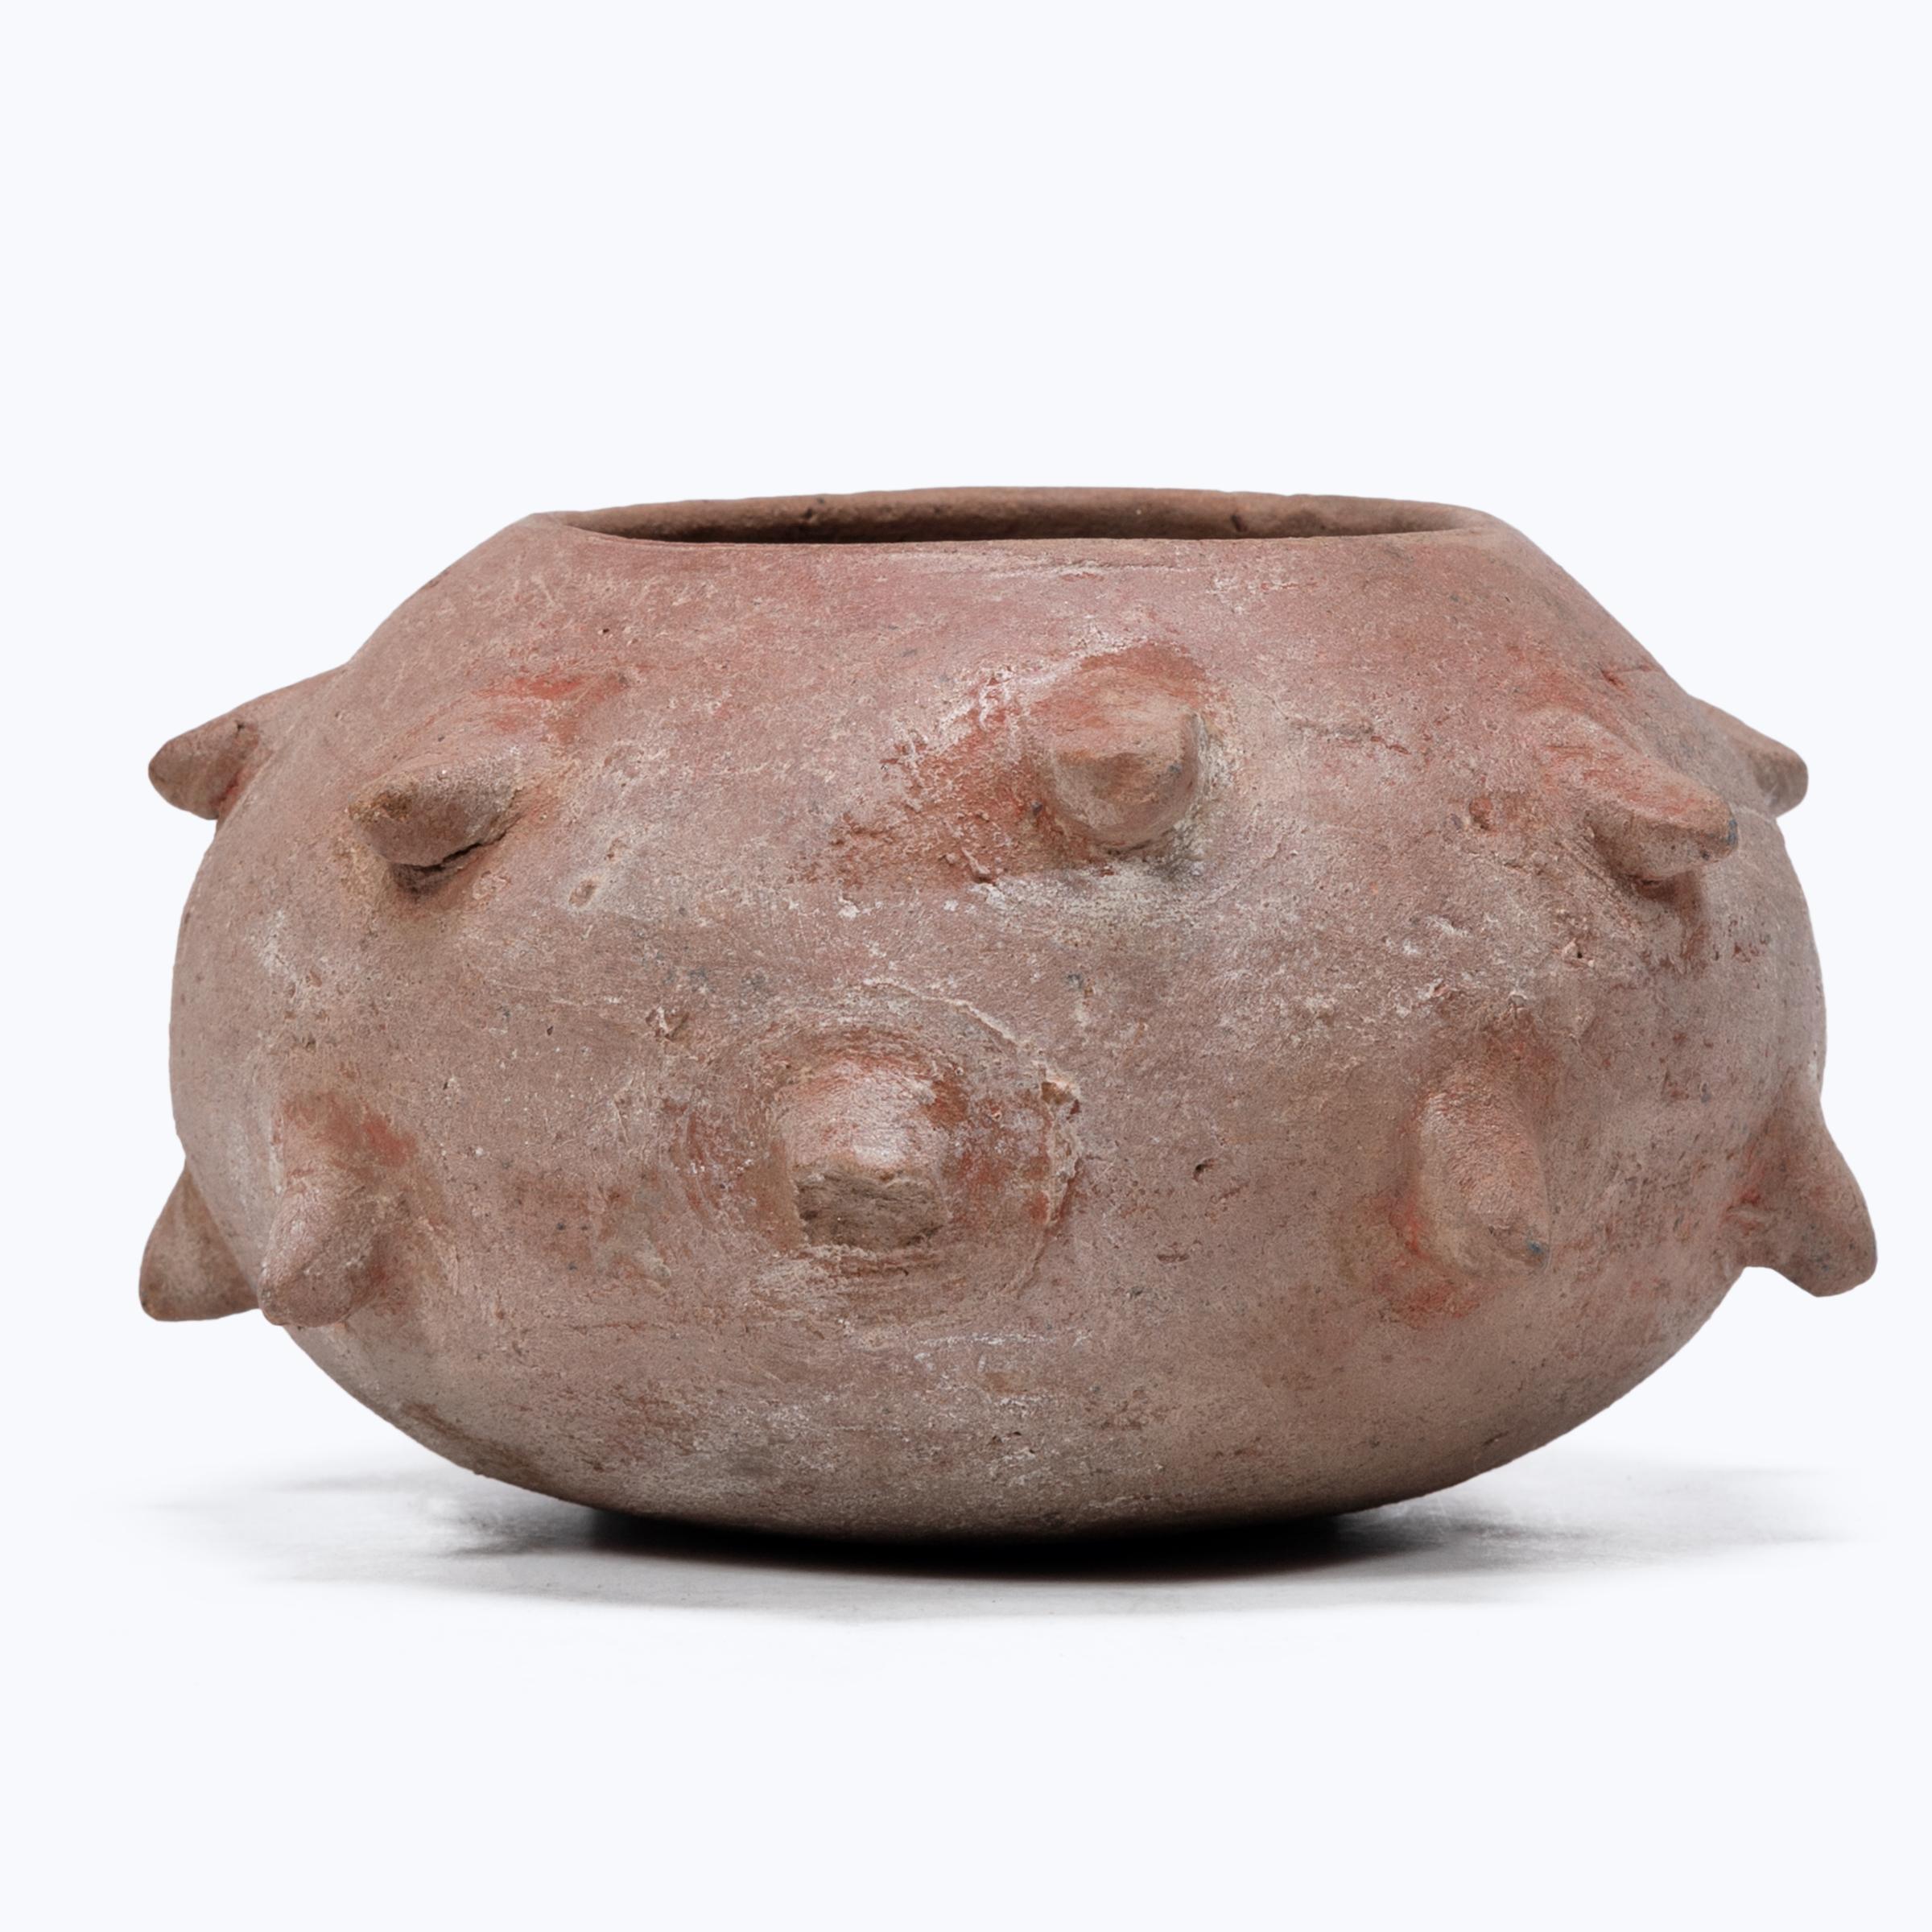 Once cloaked in a vibrant red clay slip, this beautifully worn petite vessel is actually a Maya censer. Molded spikes affixed to the exterior resemble those found on the Ceiba tree, the world tree of the Maya representing the universe and serving as